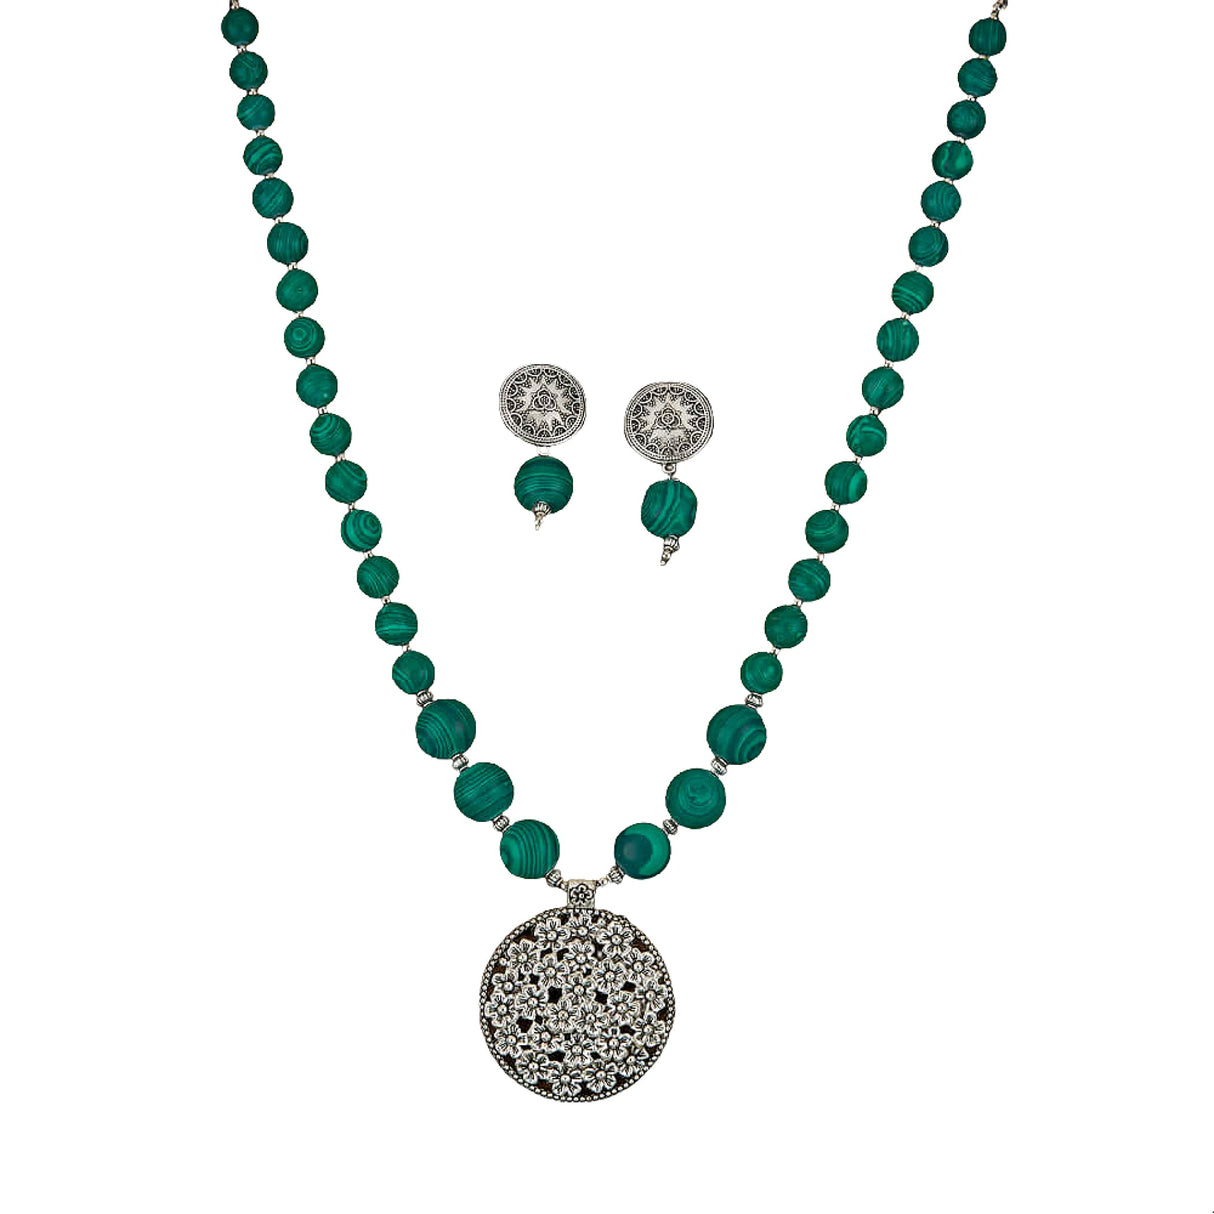 Indo - western necklace pendant set with oxidized plating